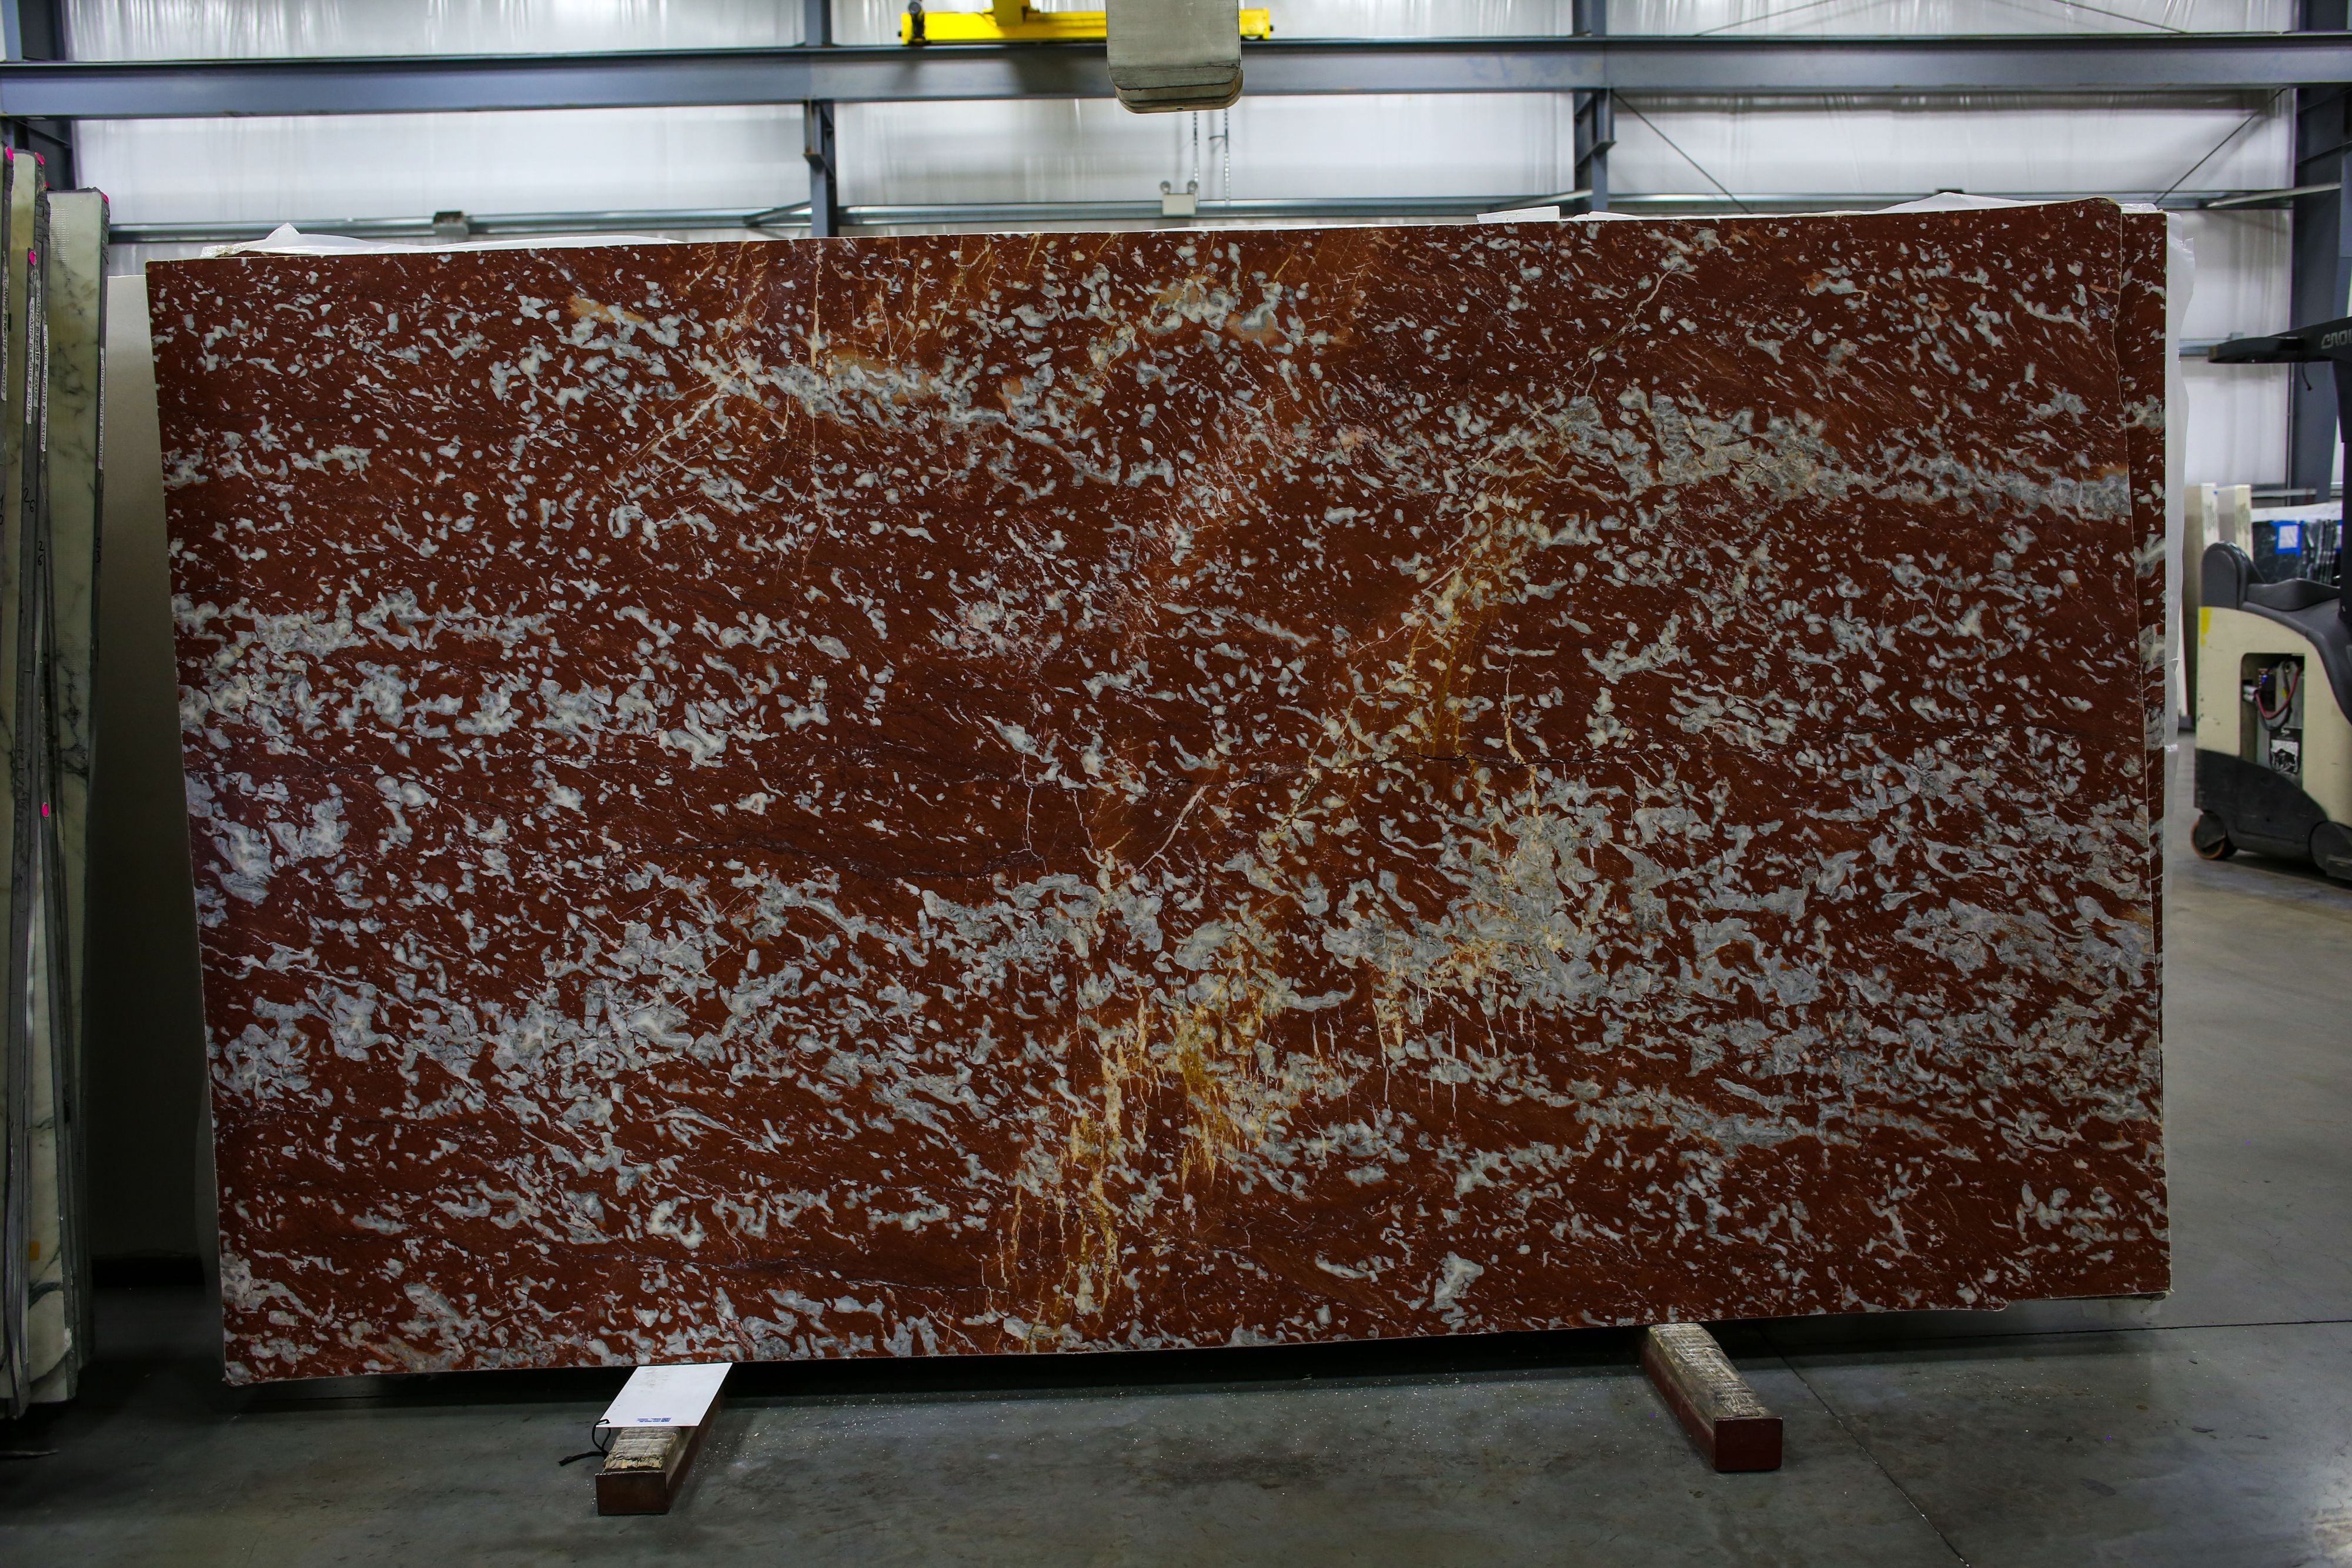  Rosso%20Francia%20Marble%20Slab%203/4%22%20%20Honed%20Stone - 55190#10 -  71x112 